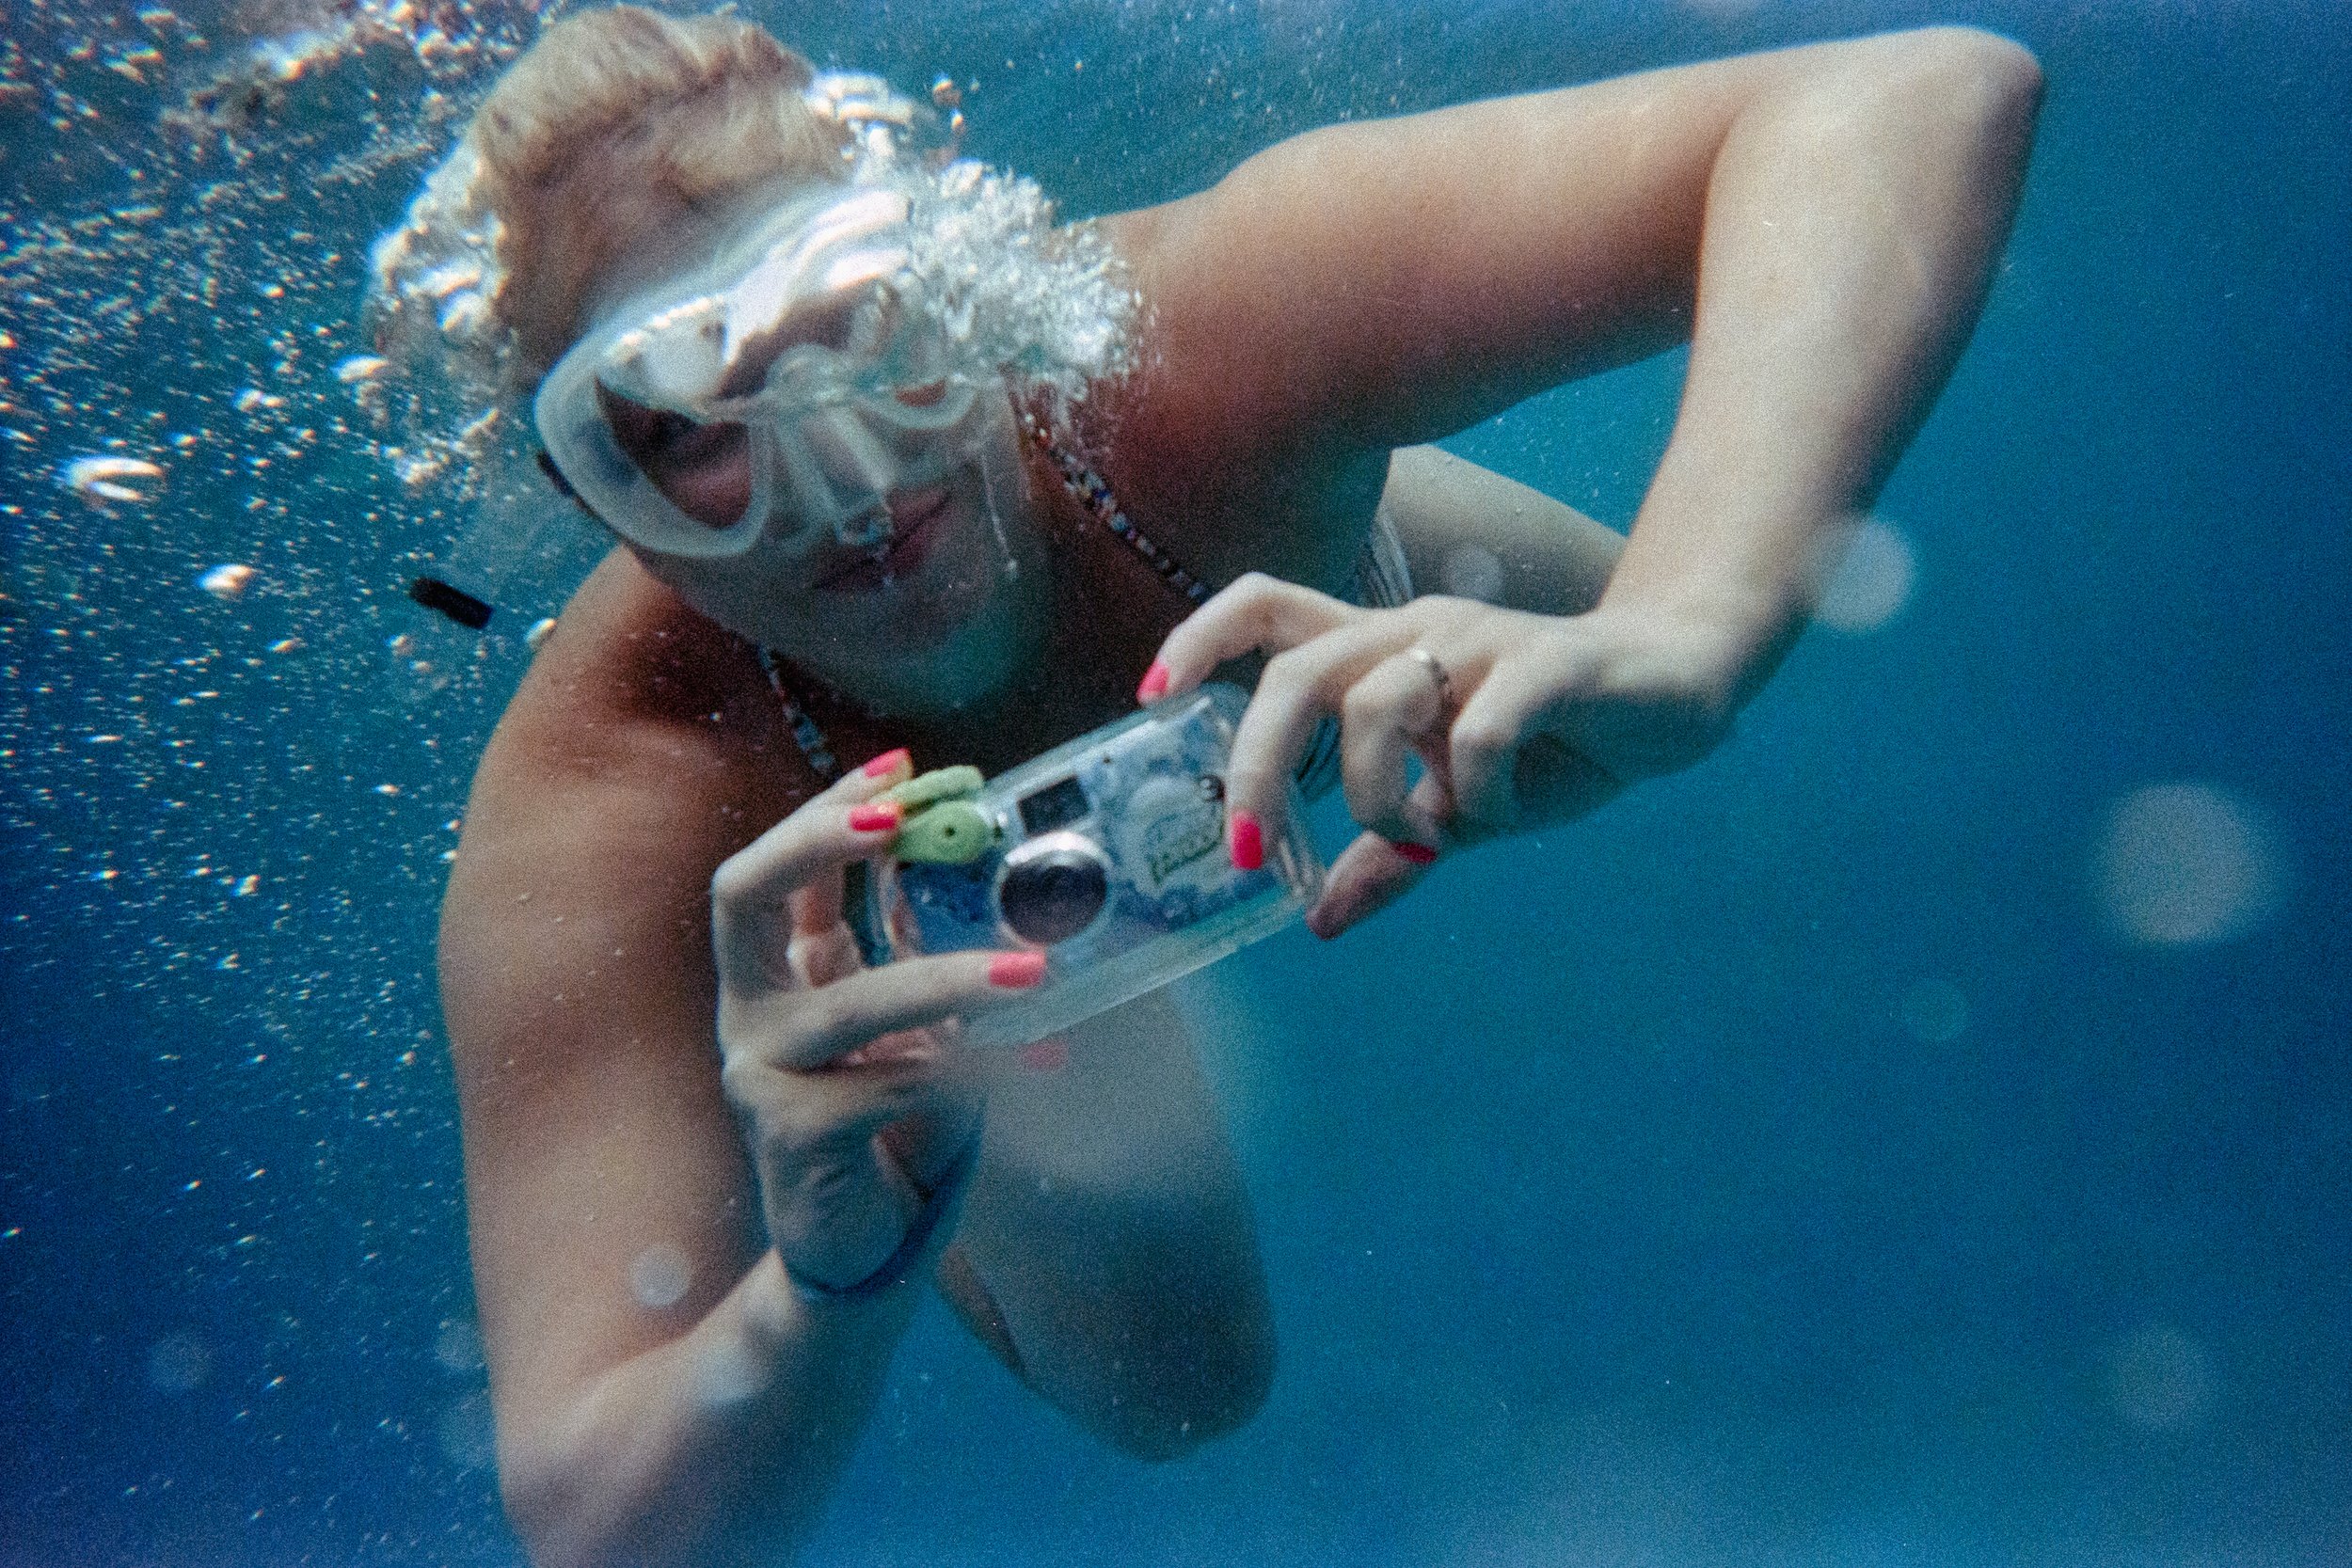 A Beginner's Guide to Disposable Camera: What, Why